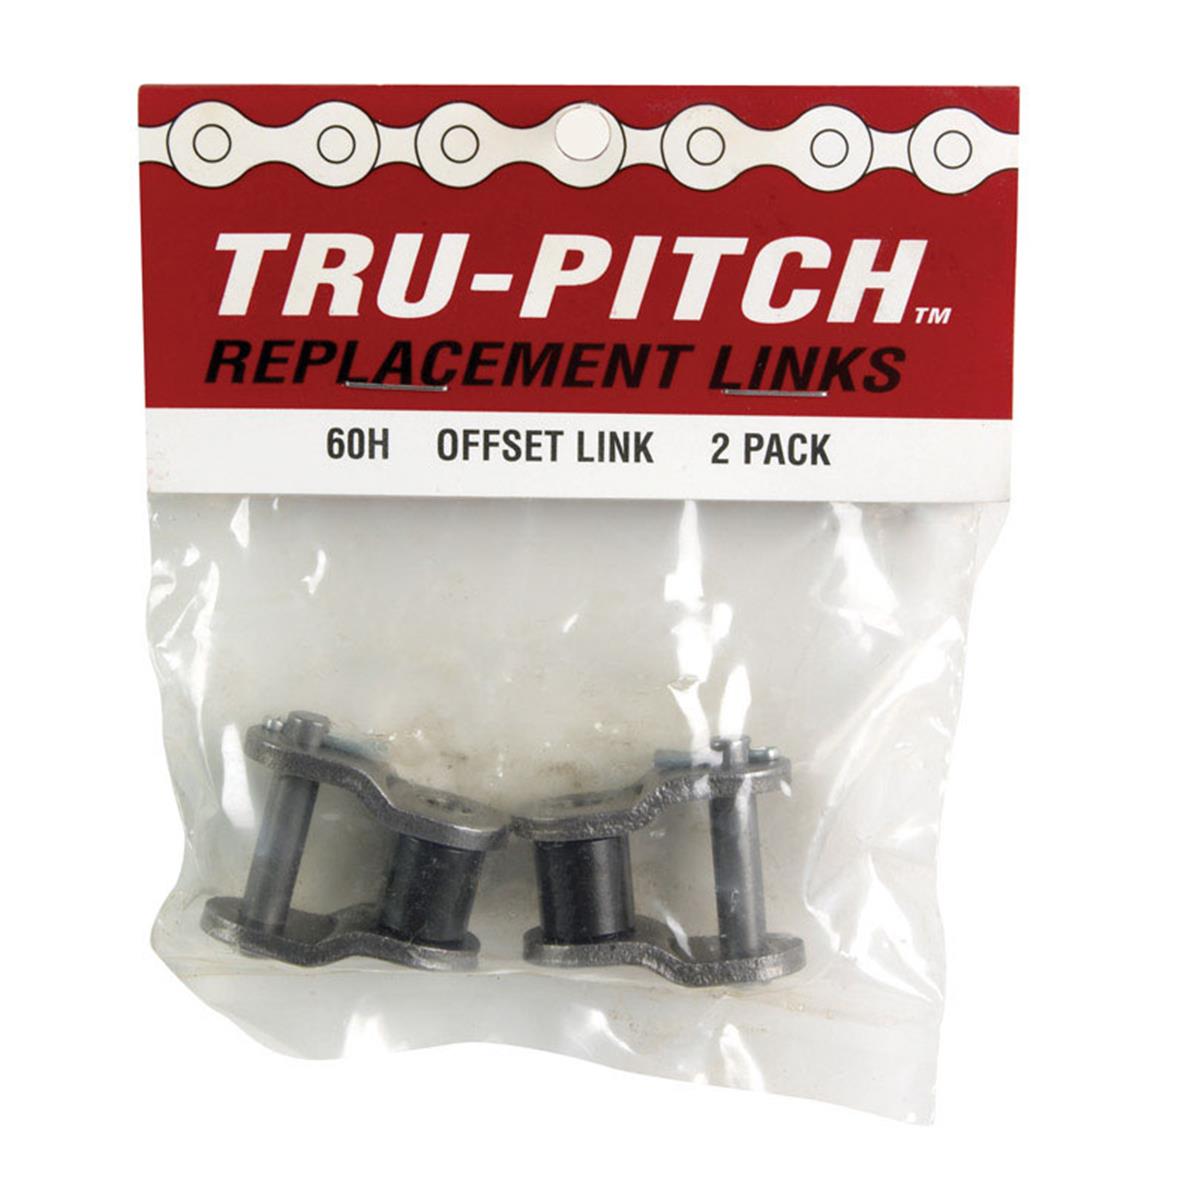 74889 5.1 X 3.2 In. Roller Chain Offset Link - Pack Of 2